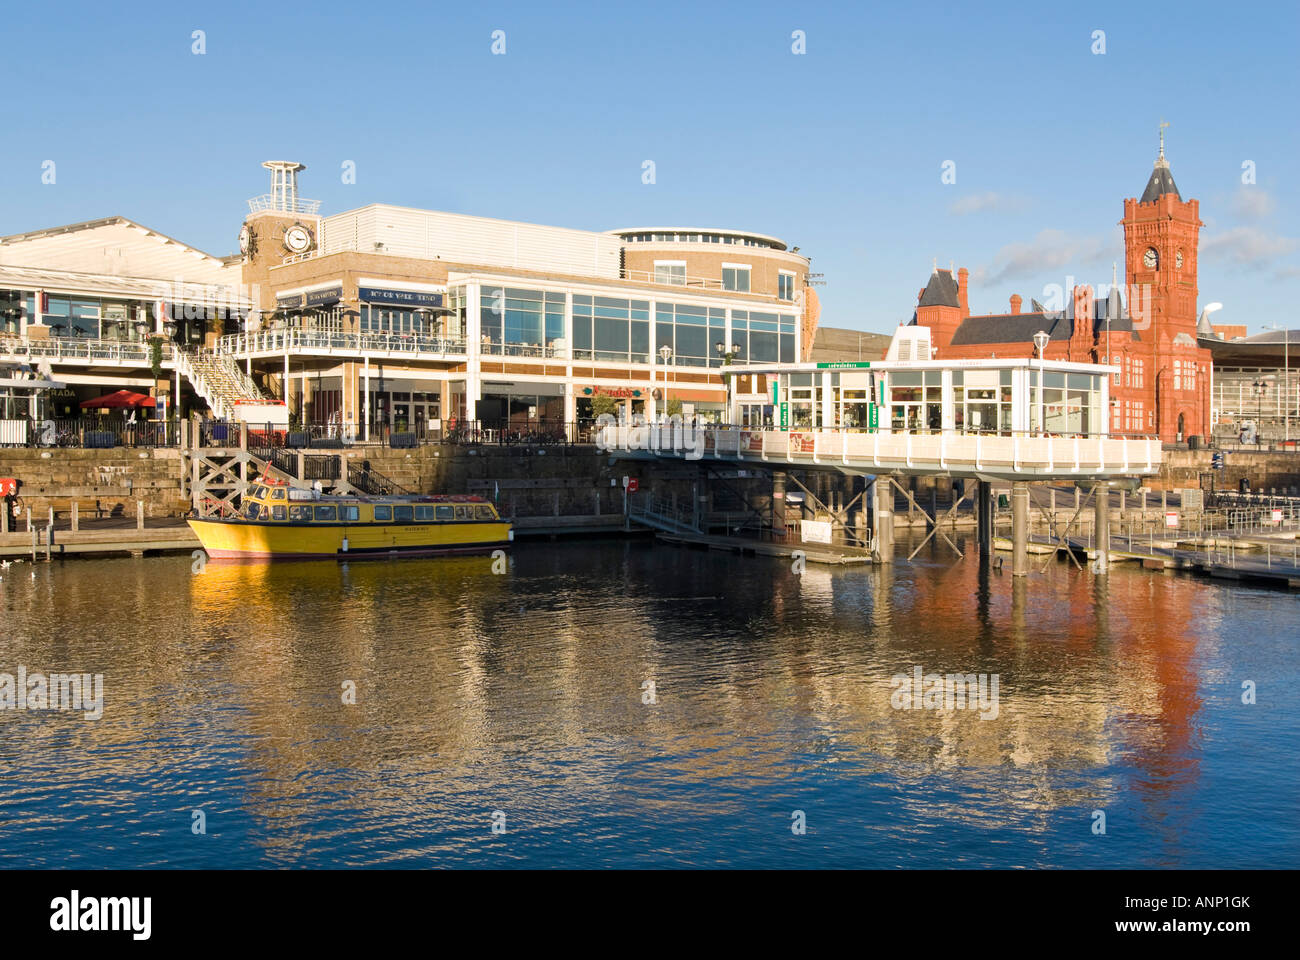 Horizontal wide angle of the regenerated Cardiff Bay (Bae Caerdydd) area Mermaid Quay and the Pierhead building on a sunny day Stock Photo